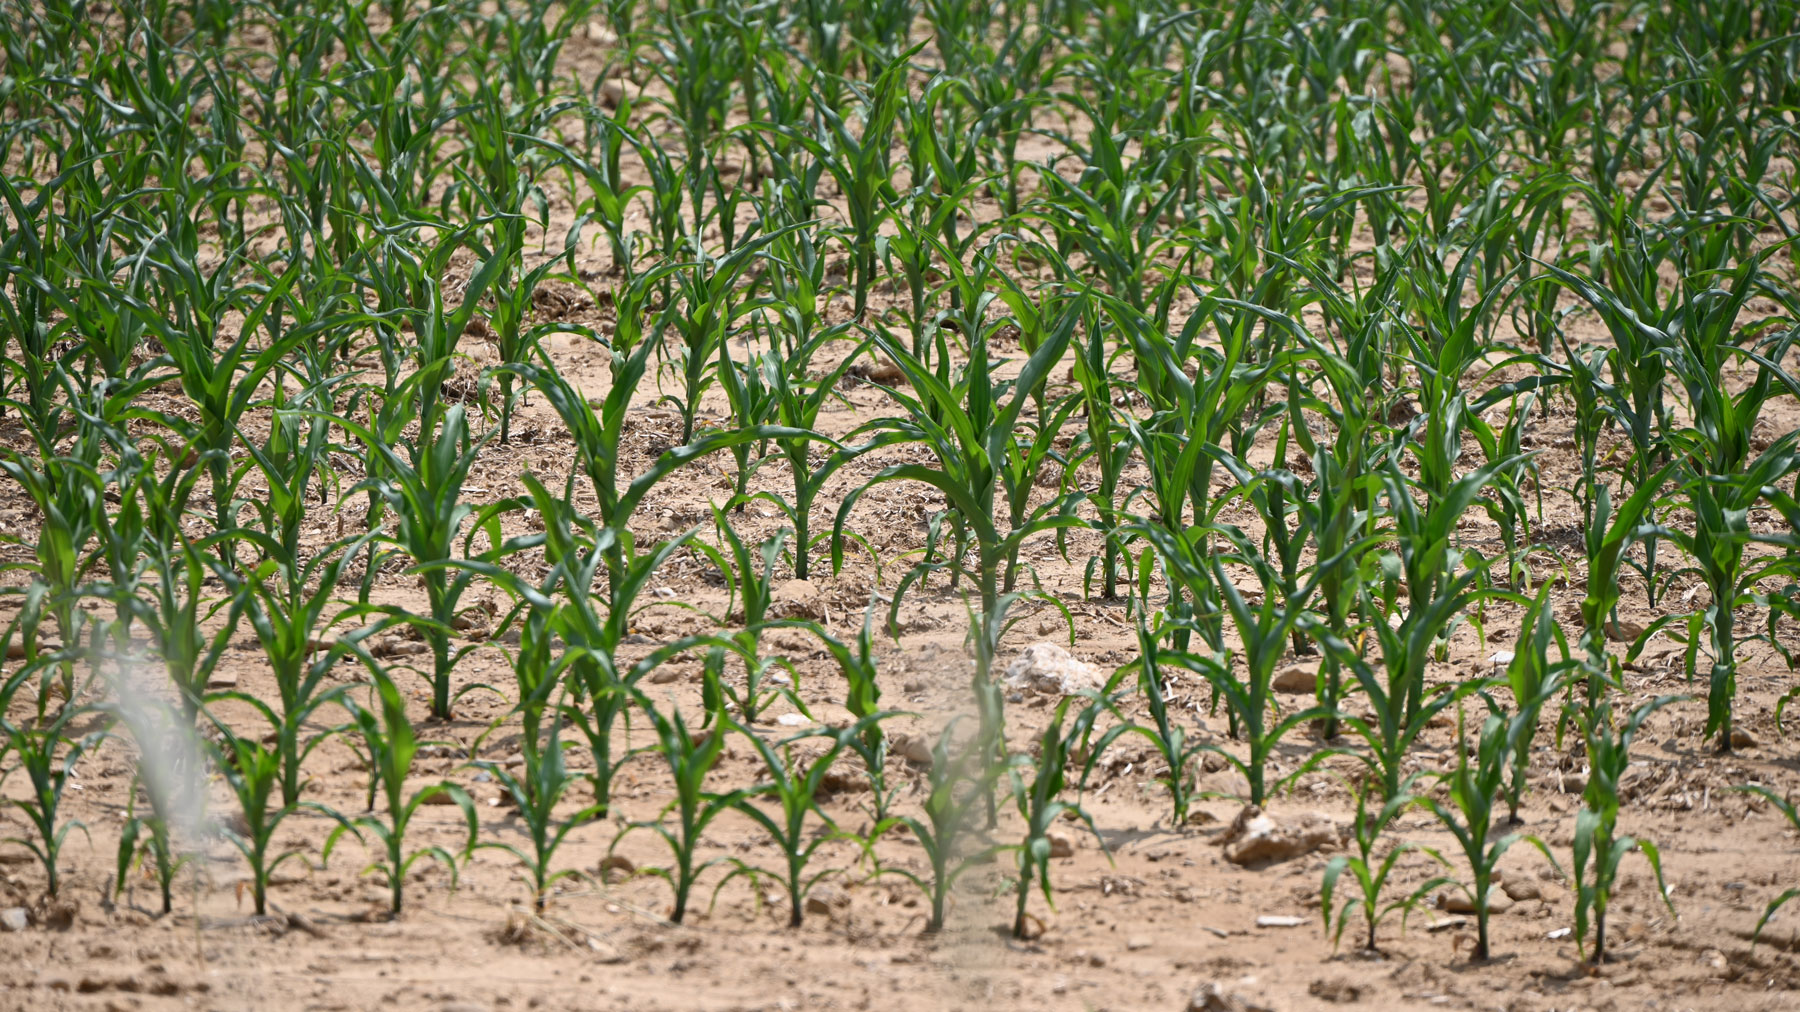 Drought Watch: 64% of U.S. Corn Crop Now Covered by Drought | The Scoop